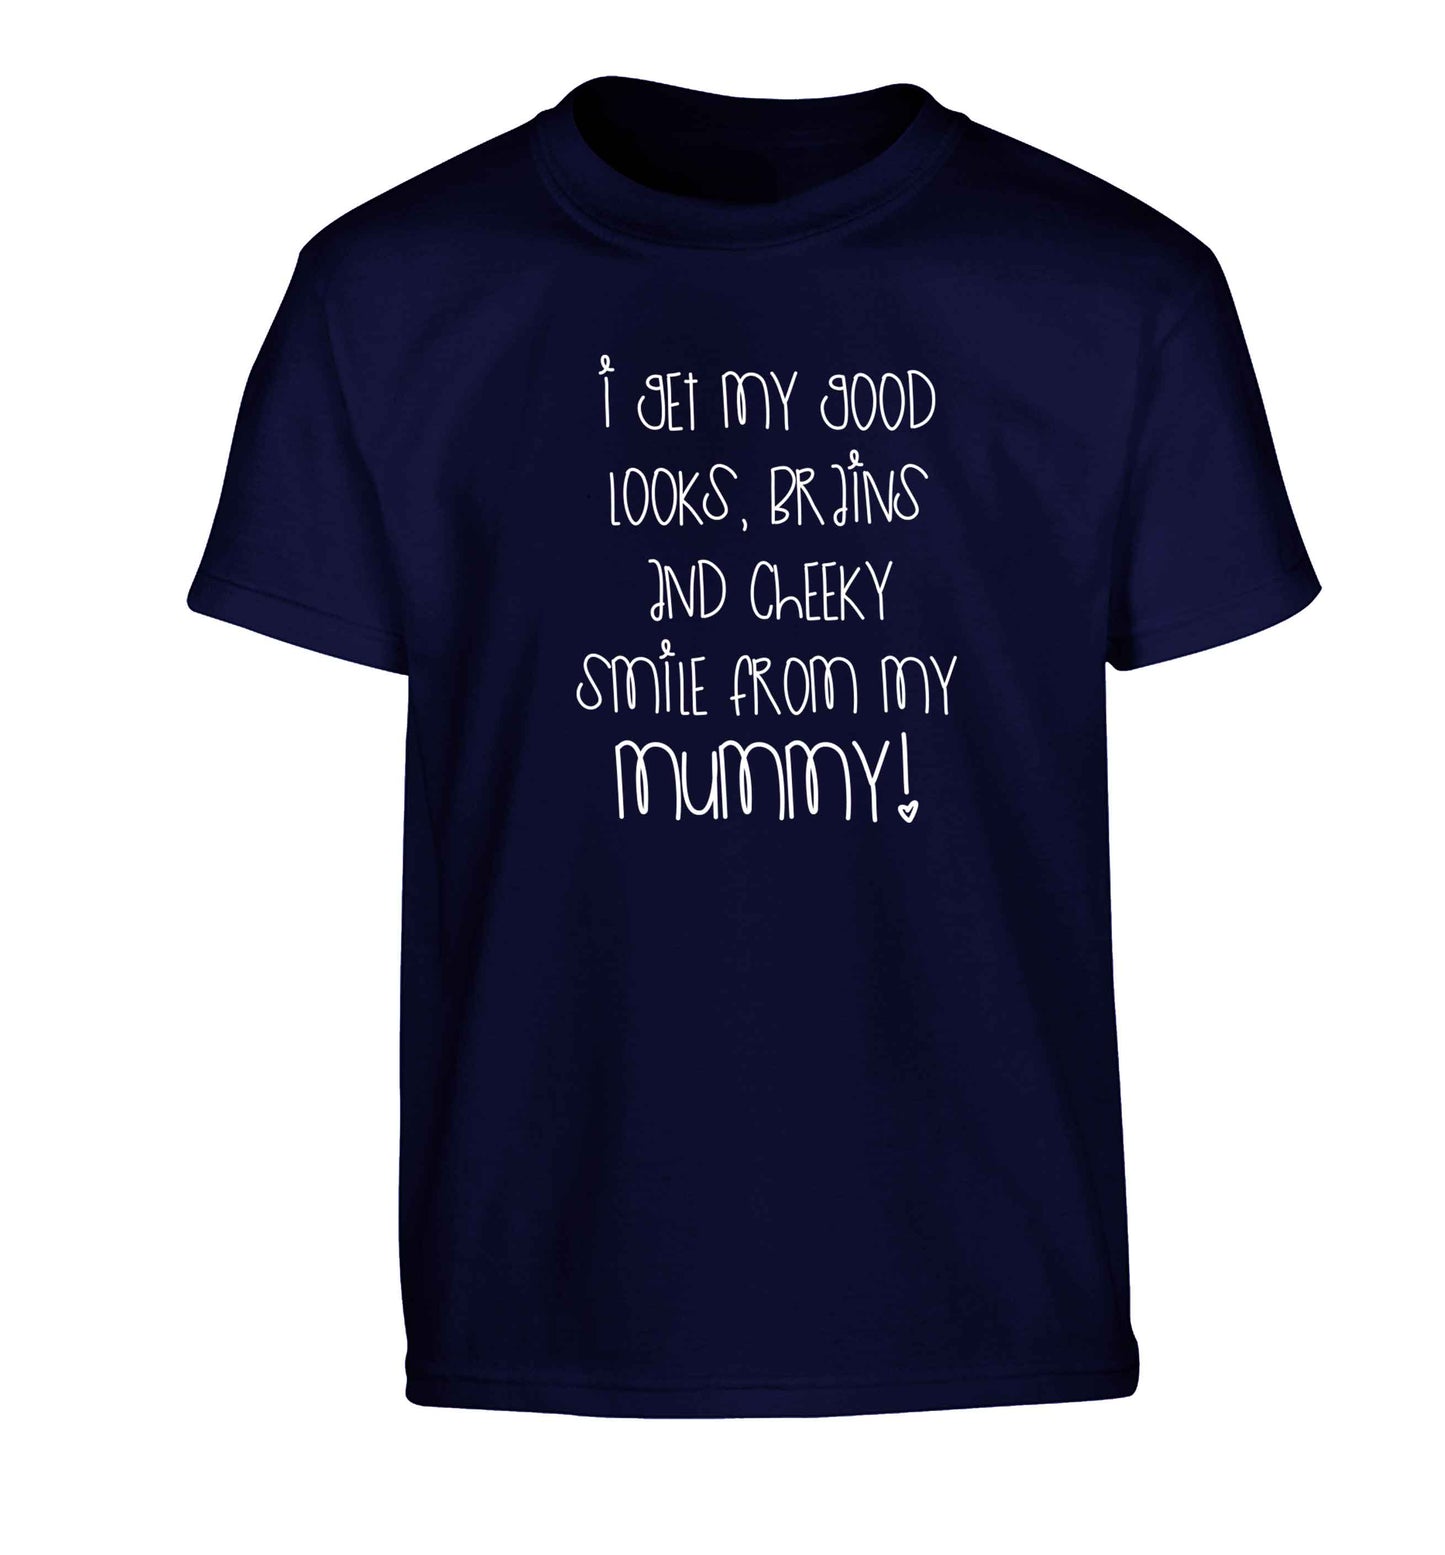 I get my good looks, brains and cheeky smile from my mummy Children's navy Tshirt 12-13 Years